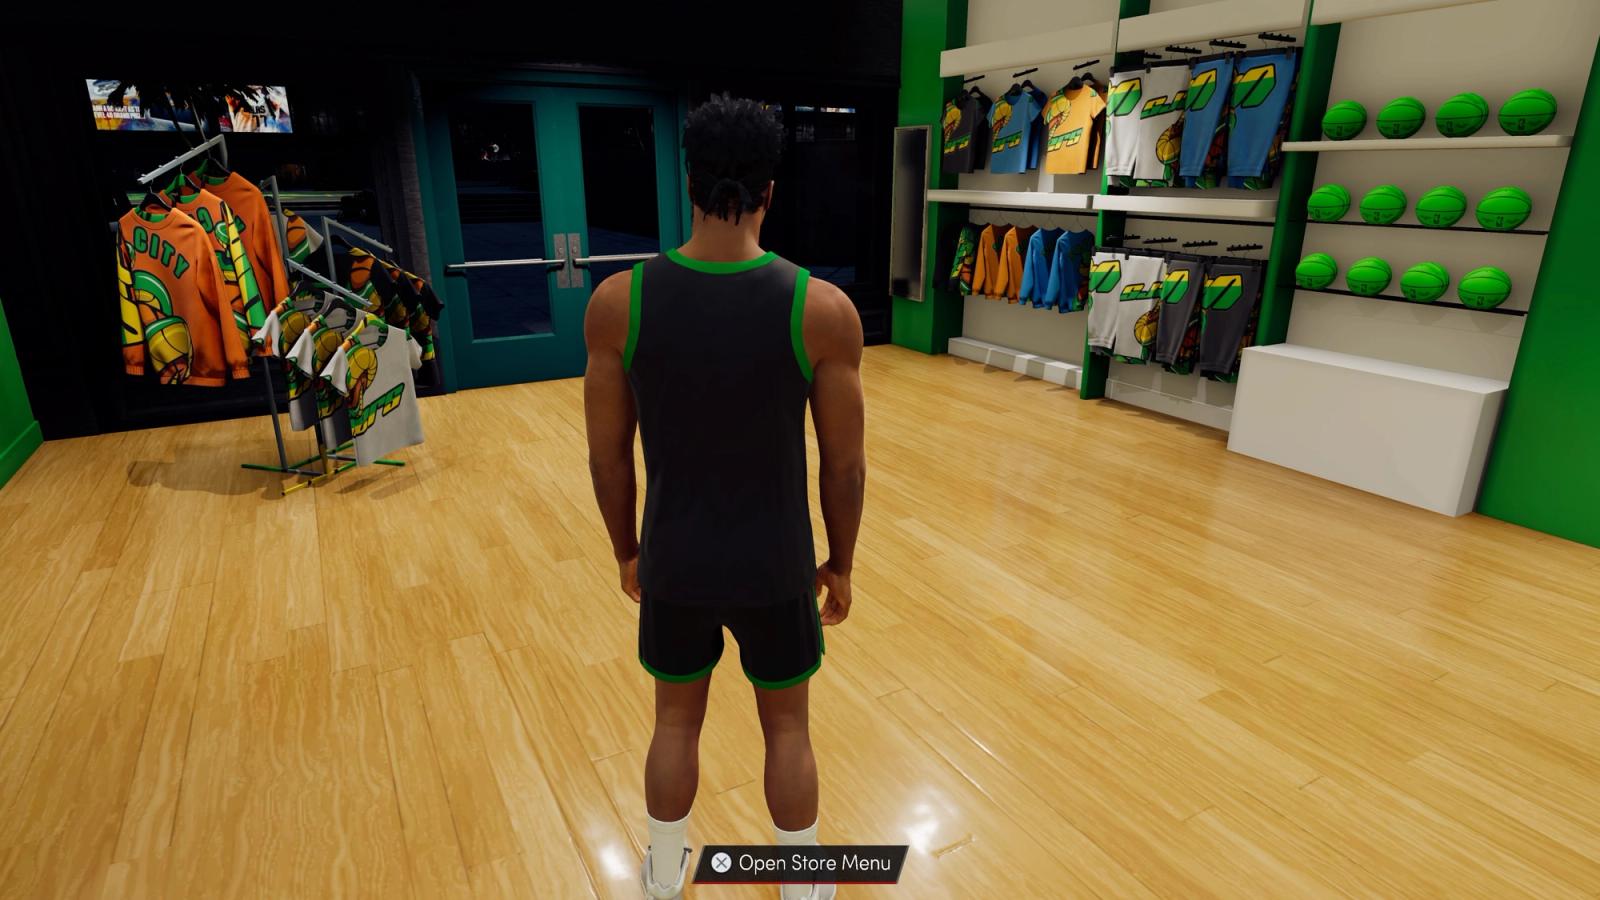 The South City Viper's store in NBA 2K22